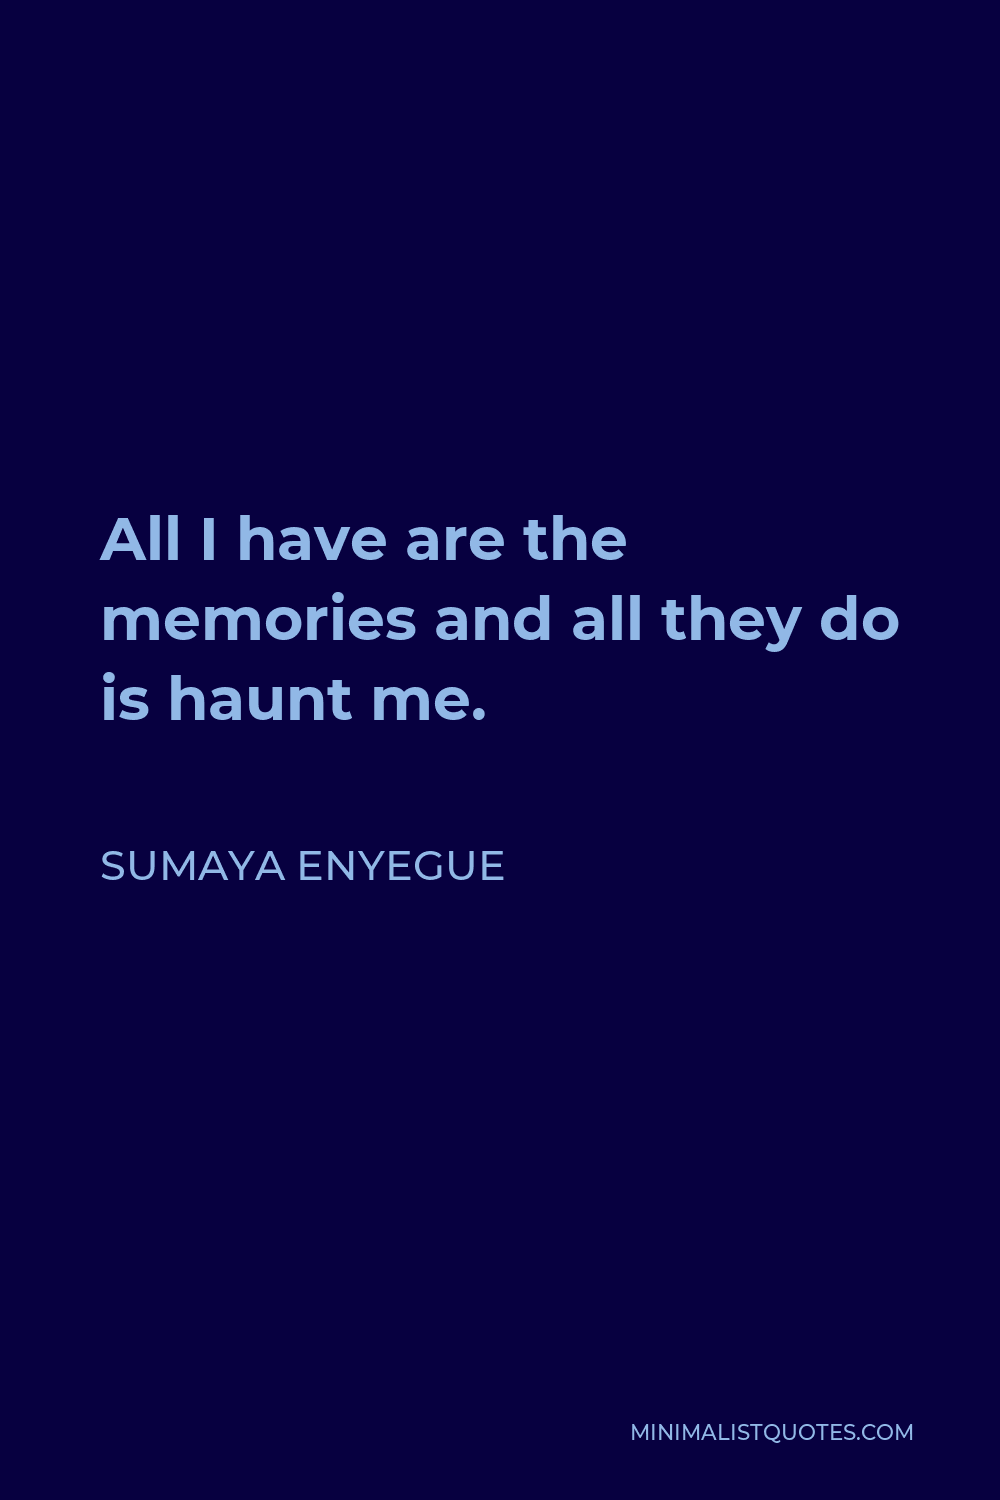 Sumaya Enyegue Quote - All I have are the memories and all they do is haunt me.